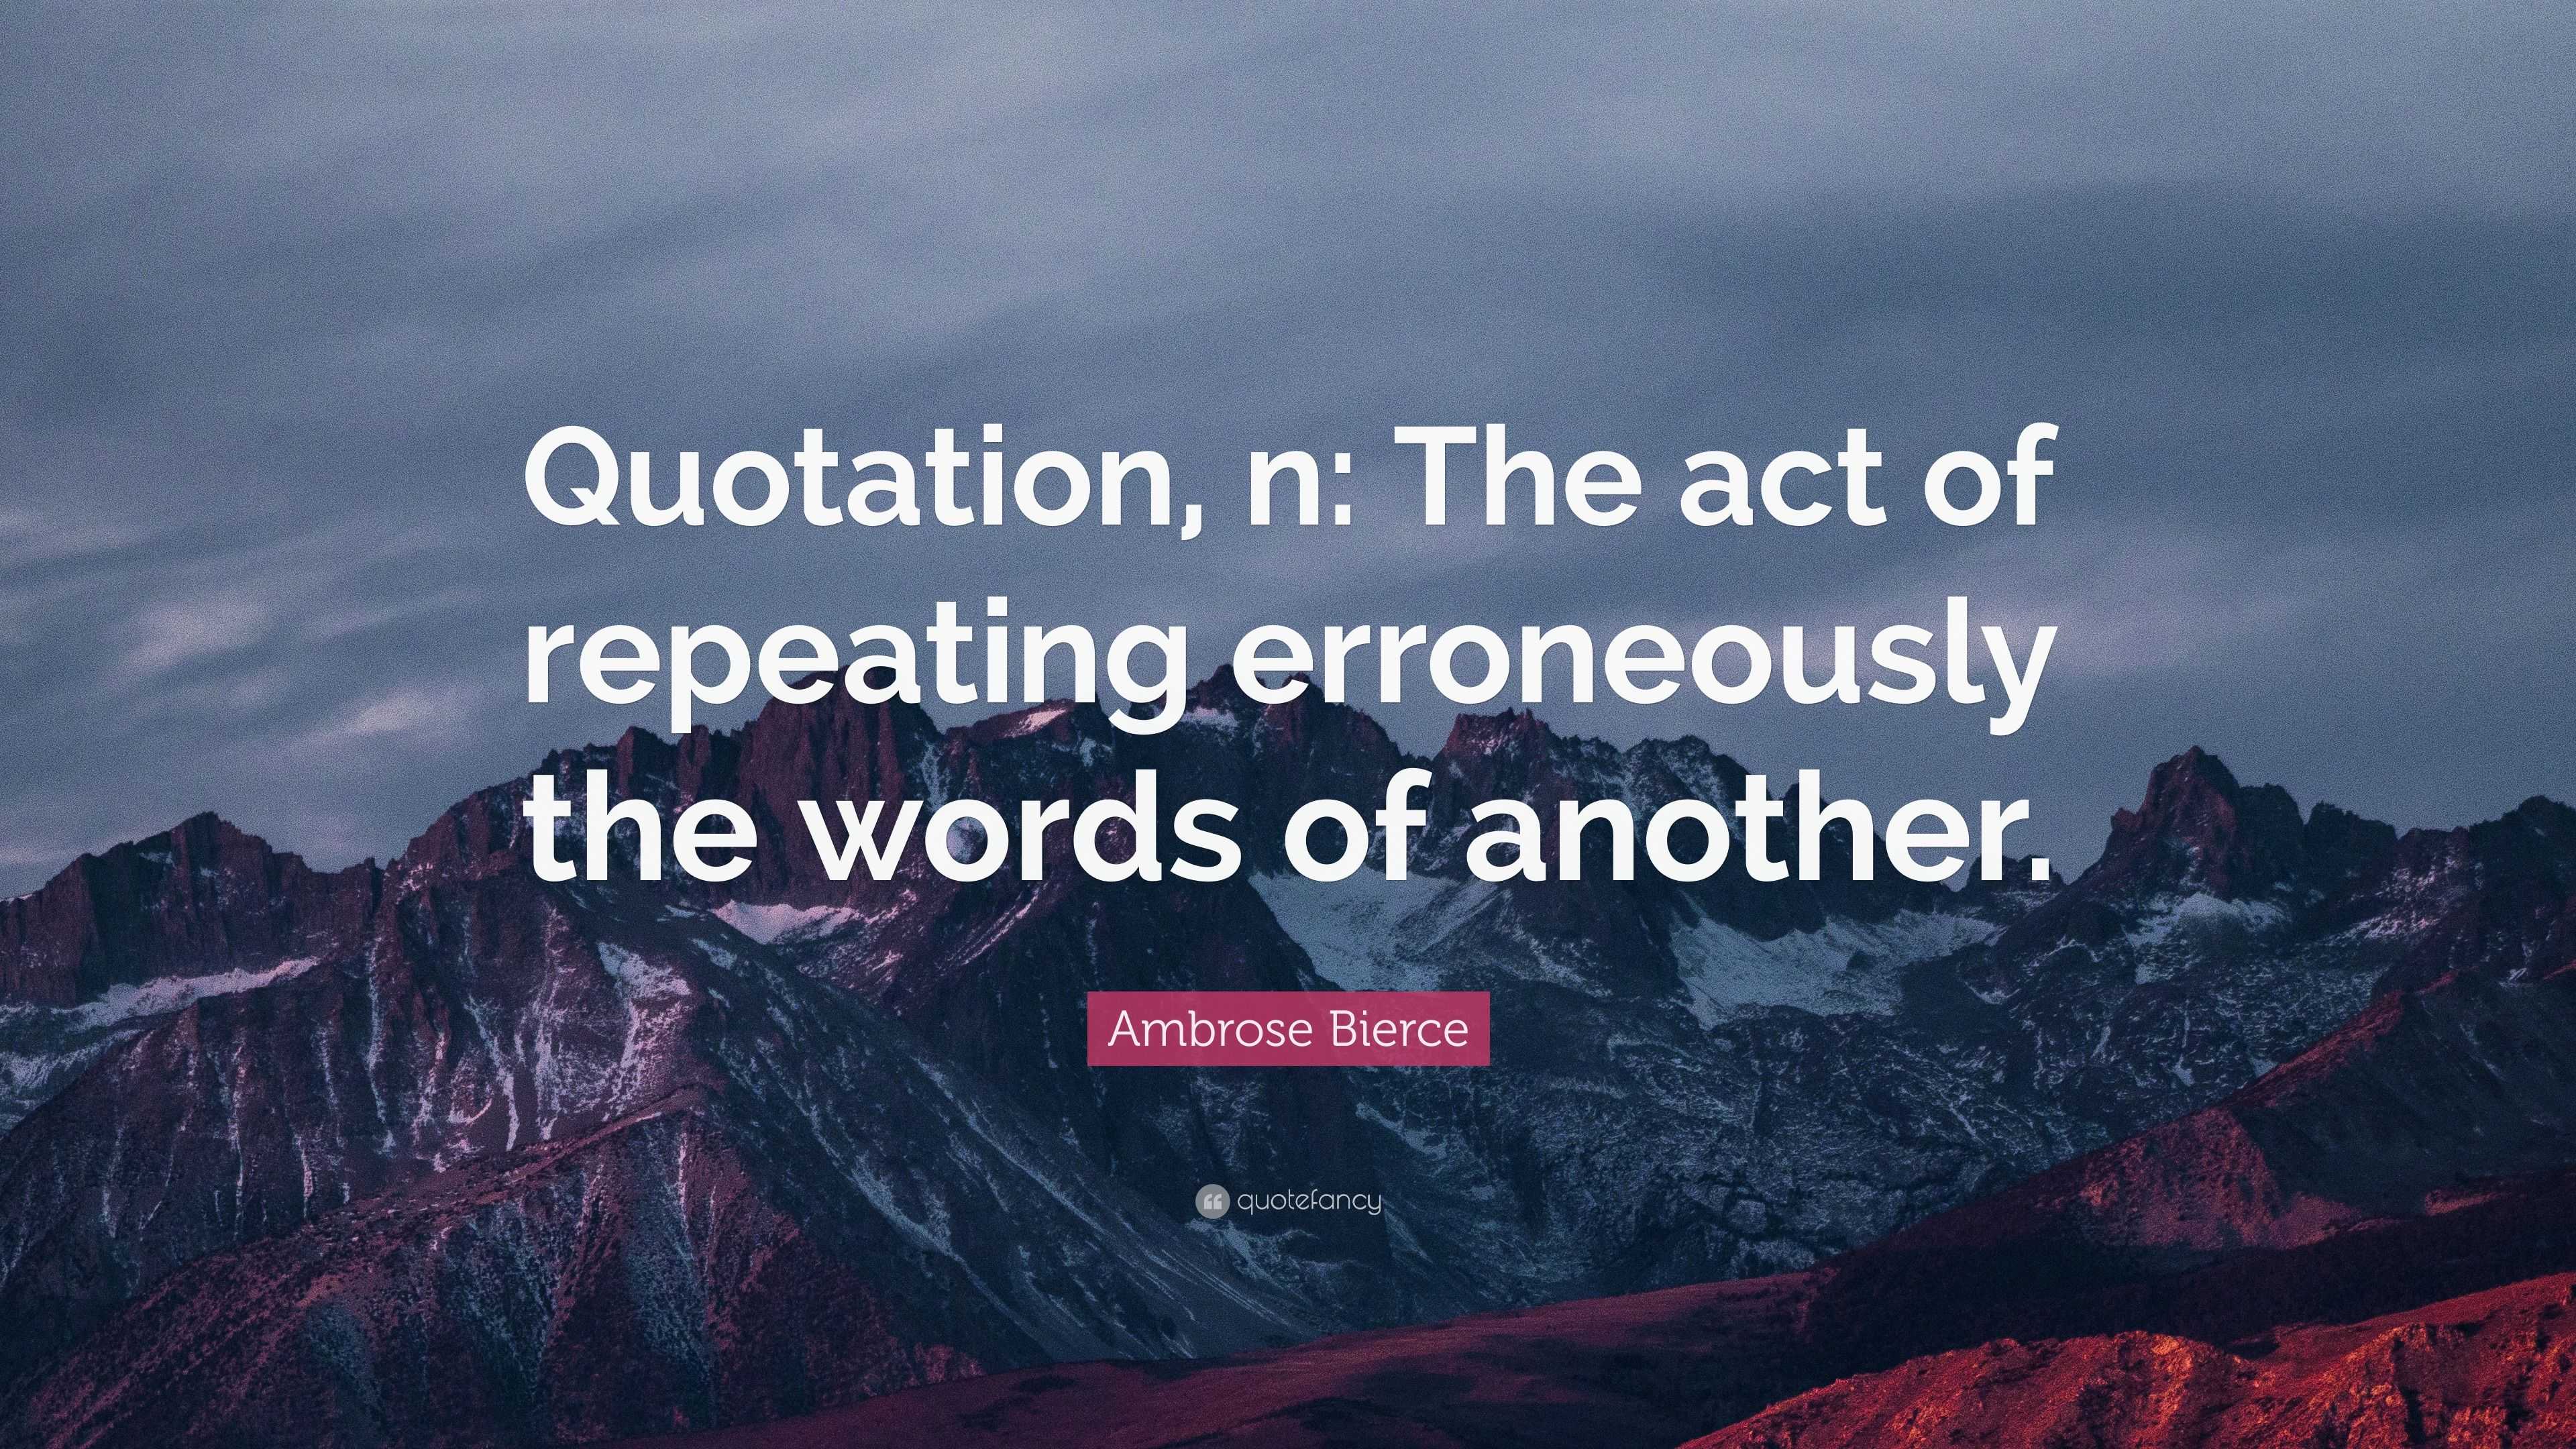 Pin on Quotation, n: The act of repeating erroneously the words of another.